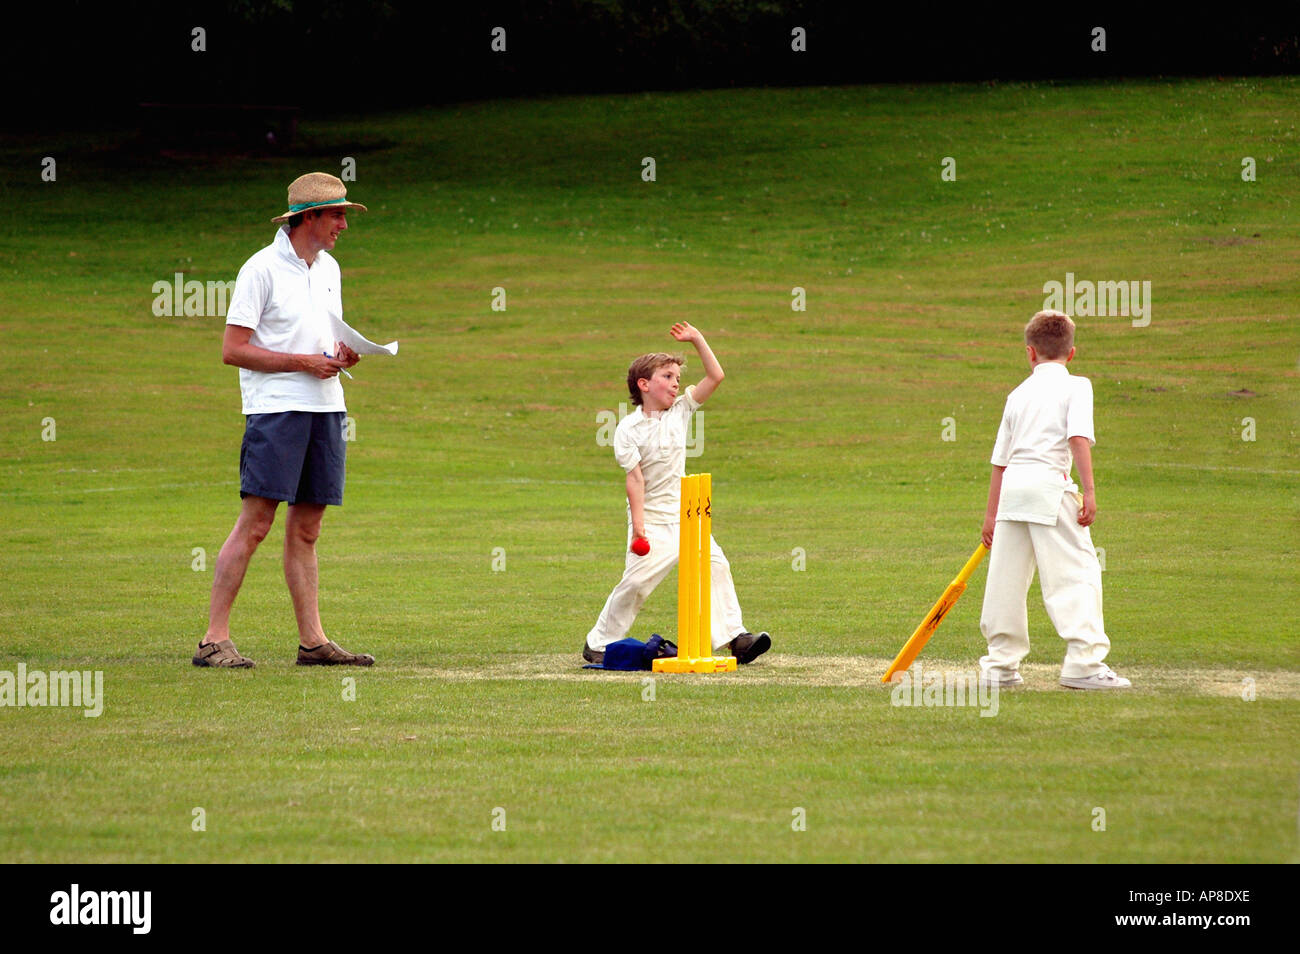 Boys playing a game of quick cricket Stock Photo